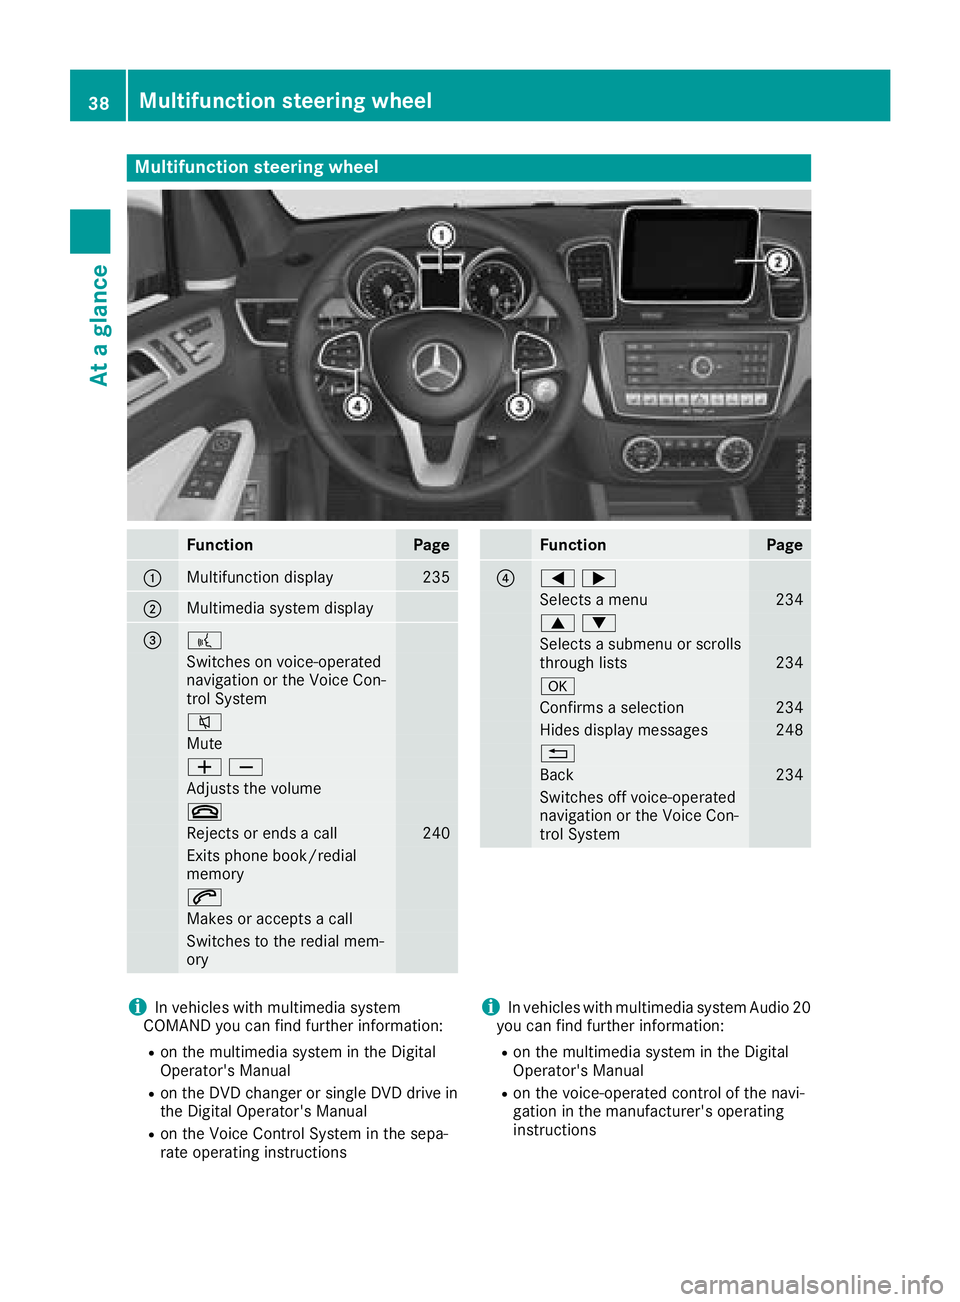 MERCEDES-BENZ GLS SUV 2018 Owners Guide Multifunction steering wheel
FunctionPage
:Multifunction display235
;Multimedia system display
=?
Switches on voice-operated
navigation or the Voice Con-
trol System
8
Mute
WX
Adjusts the volume
~
Rej